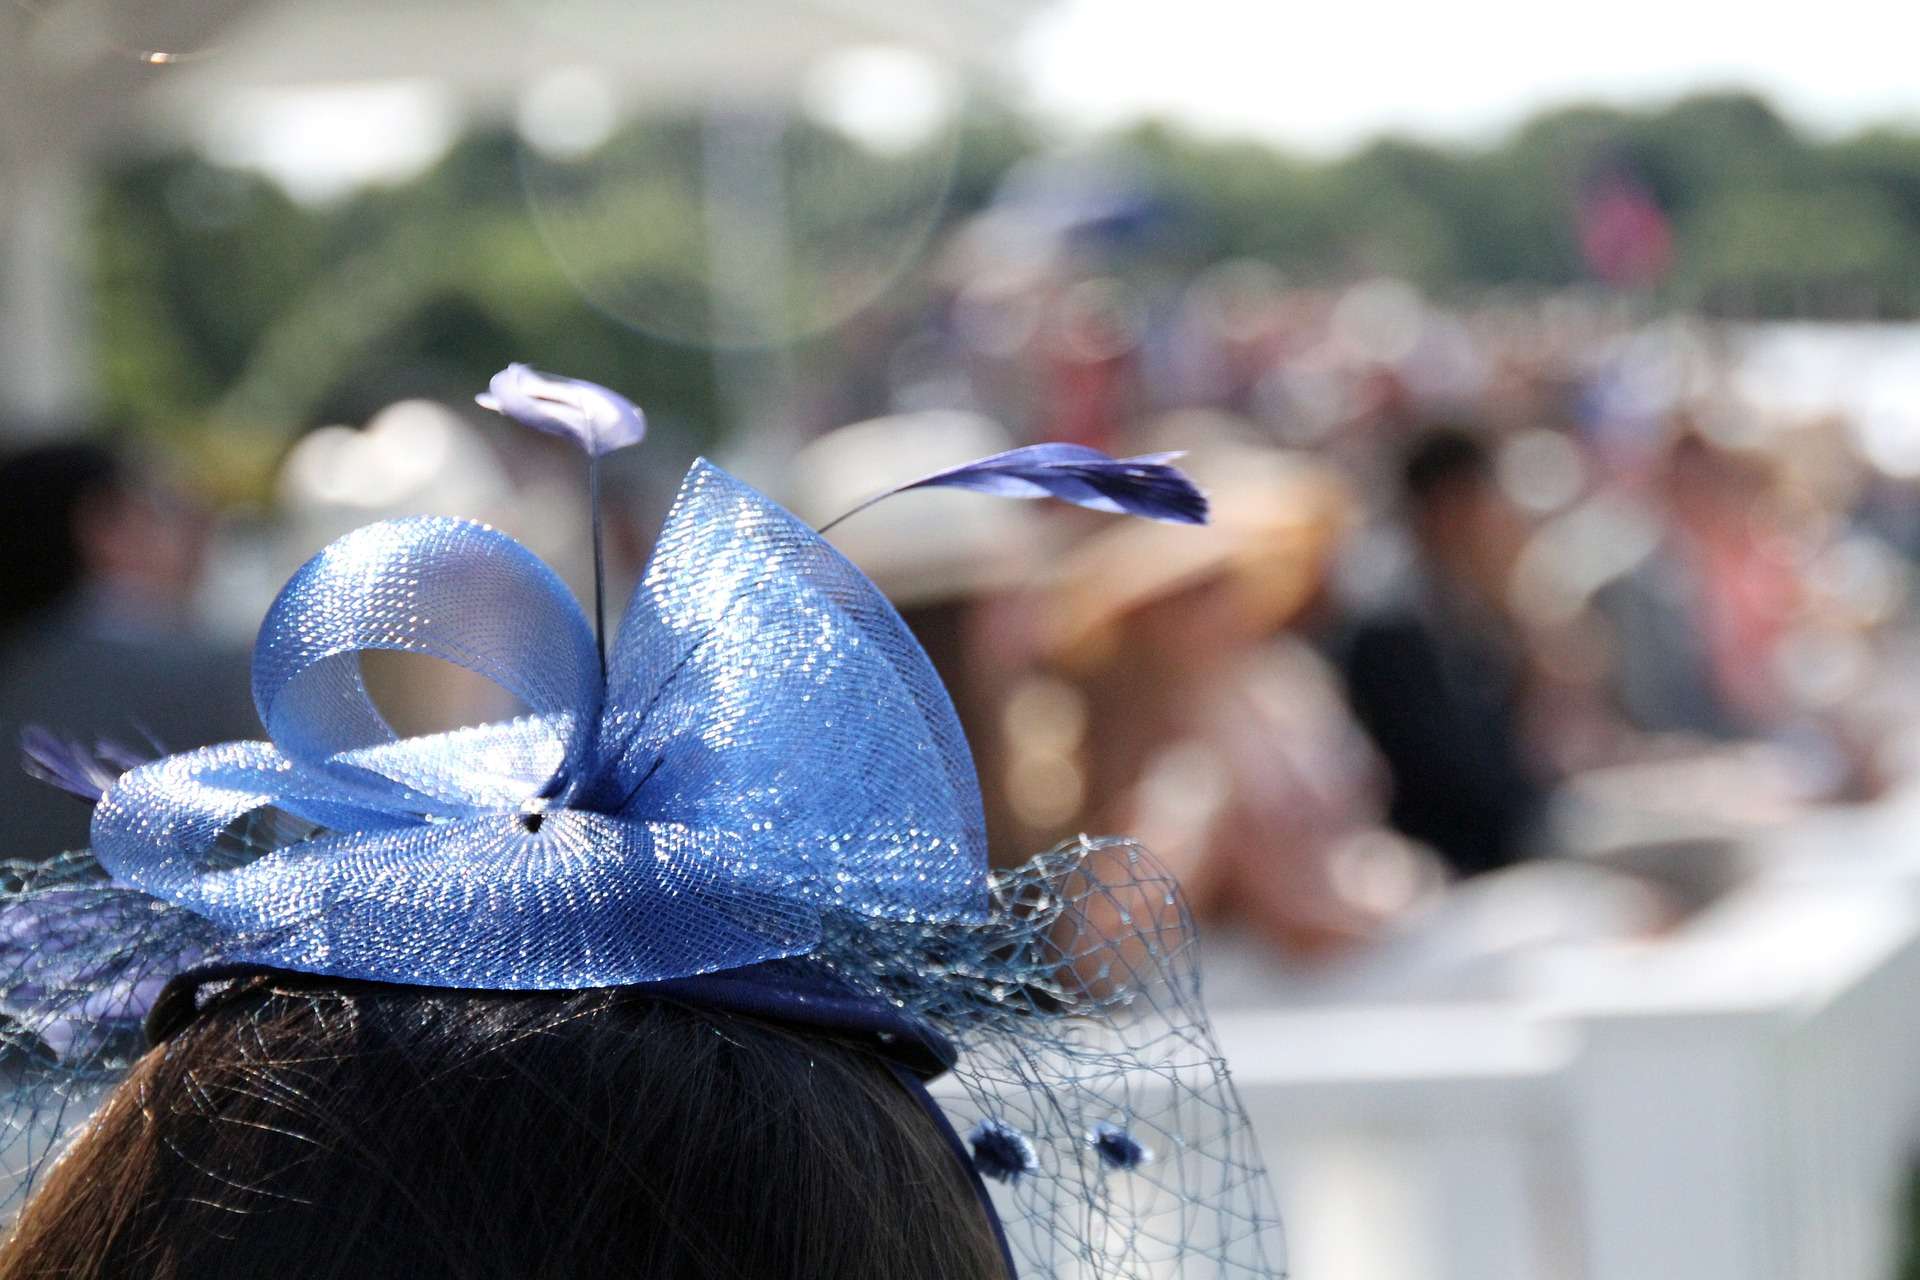 How to enjoy a day at the races